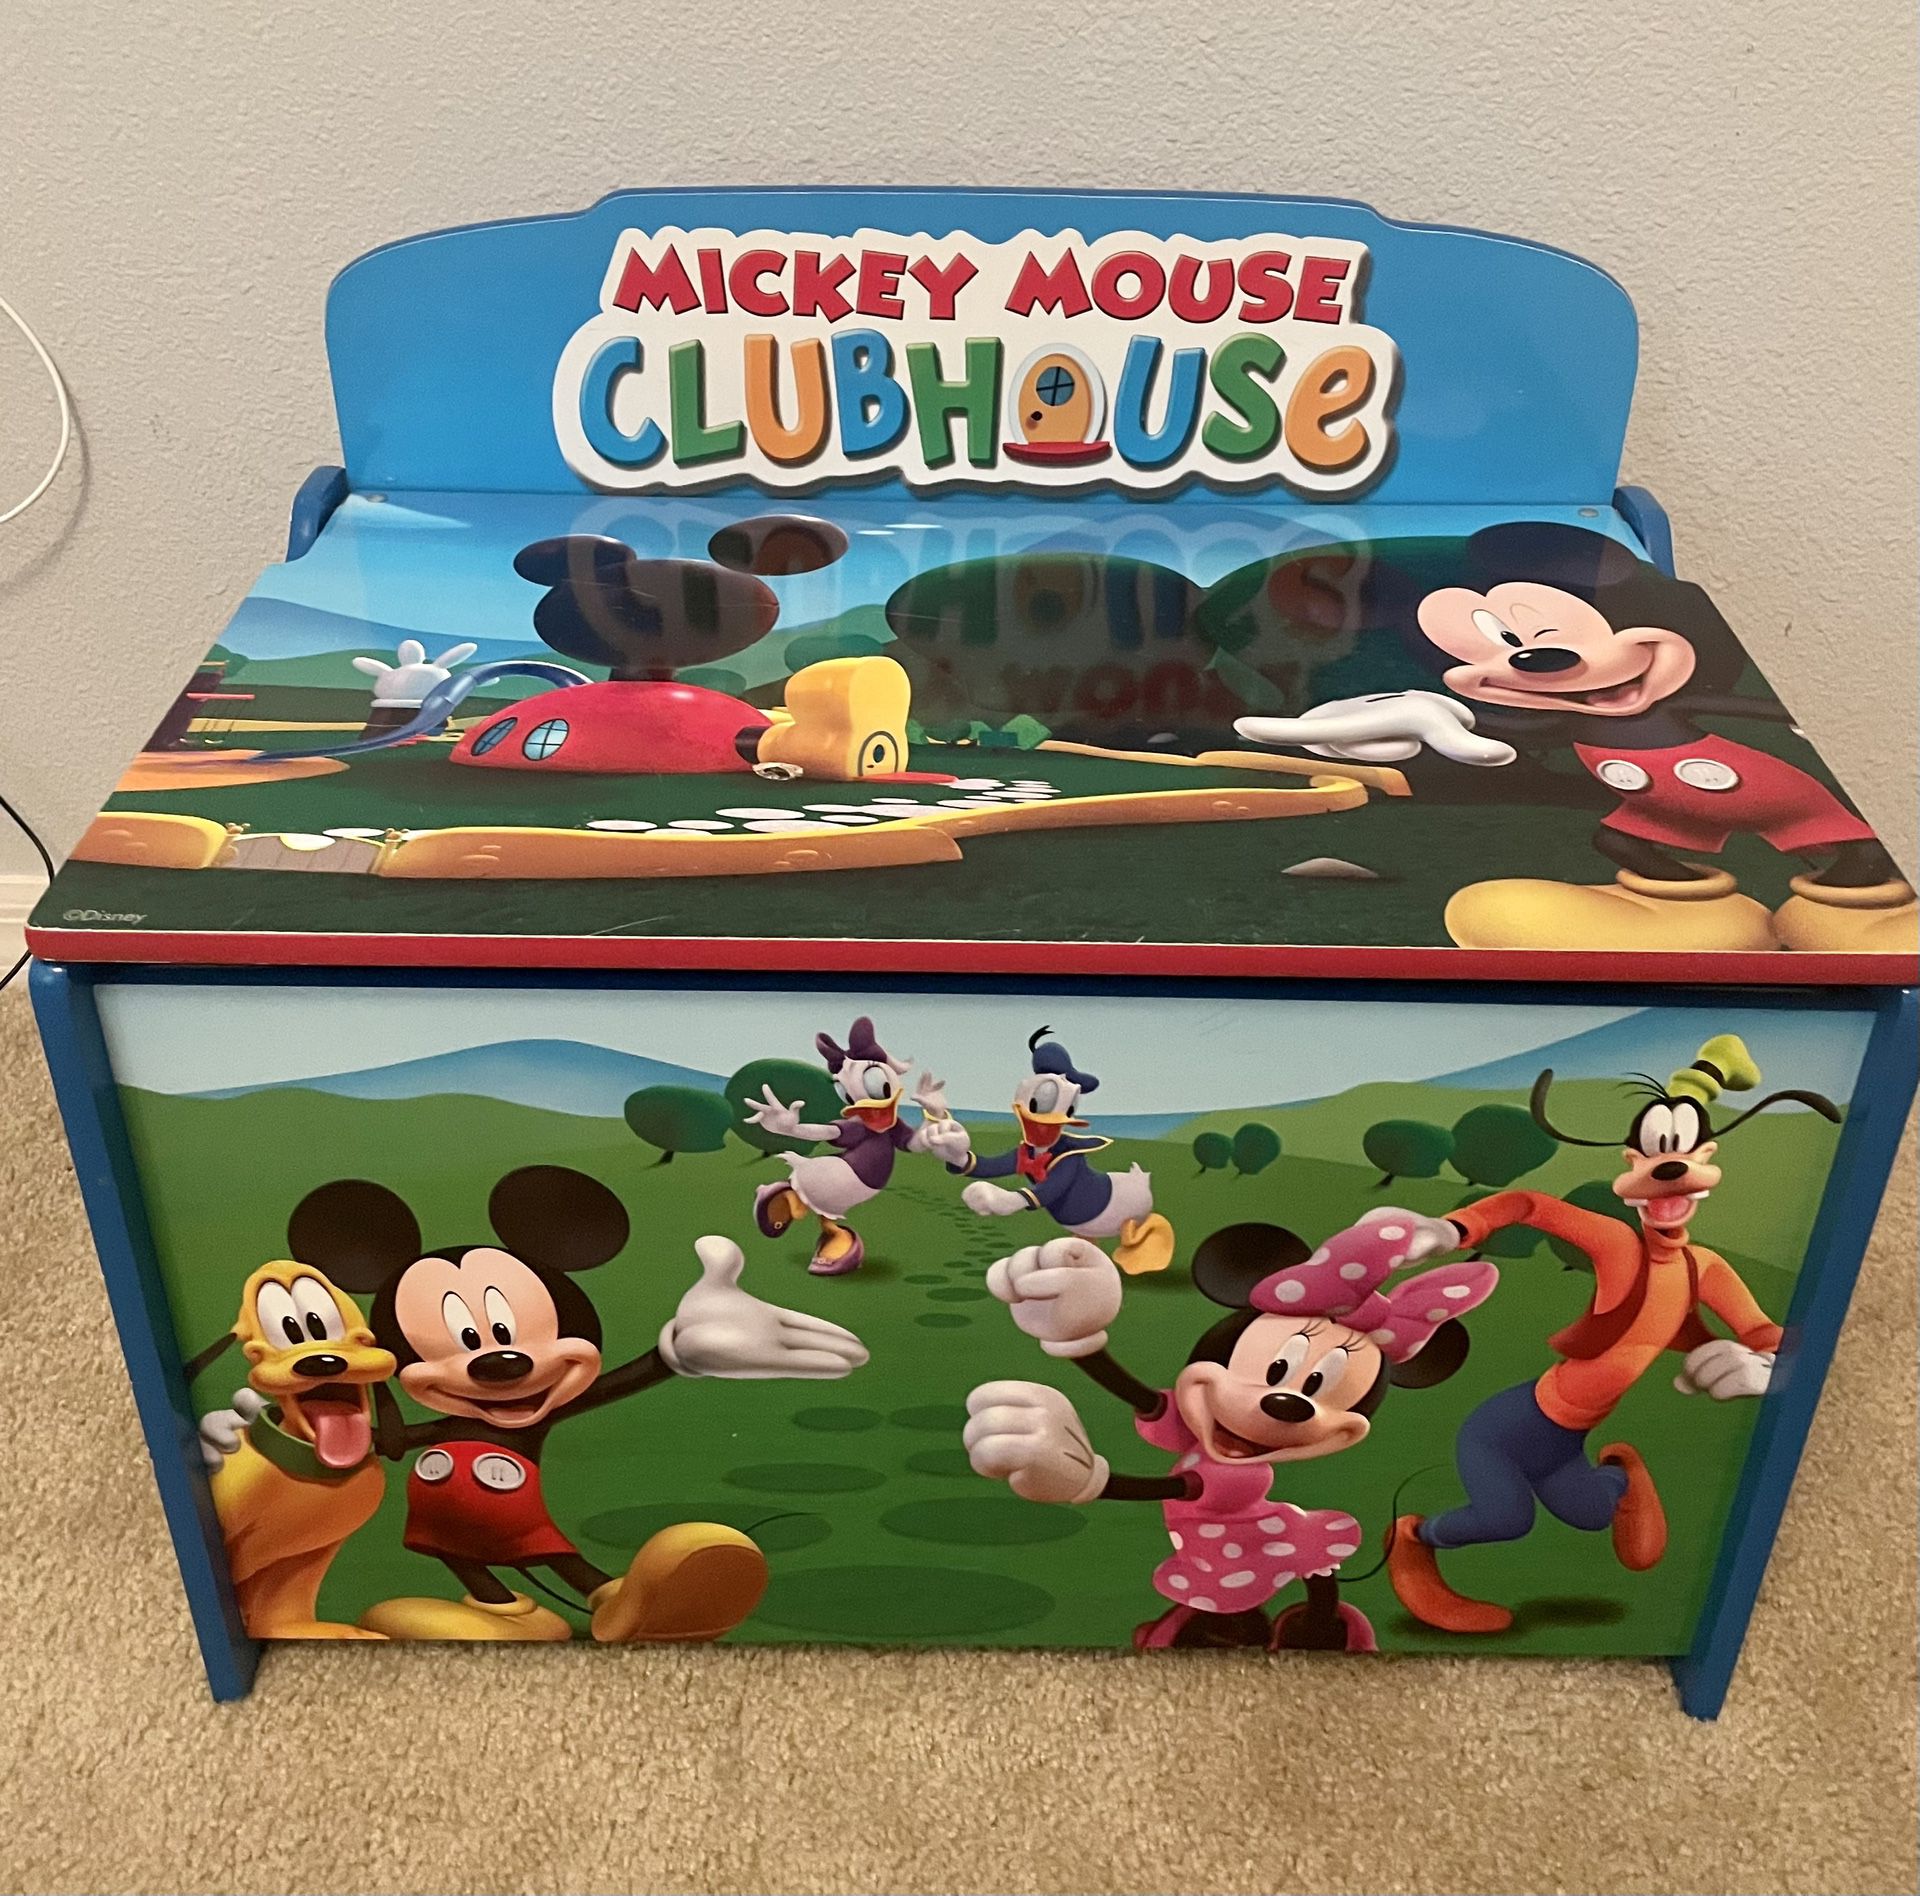 Toddler Room Set: Mickey Mouse